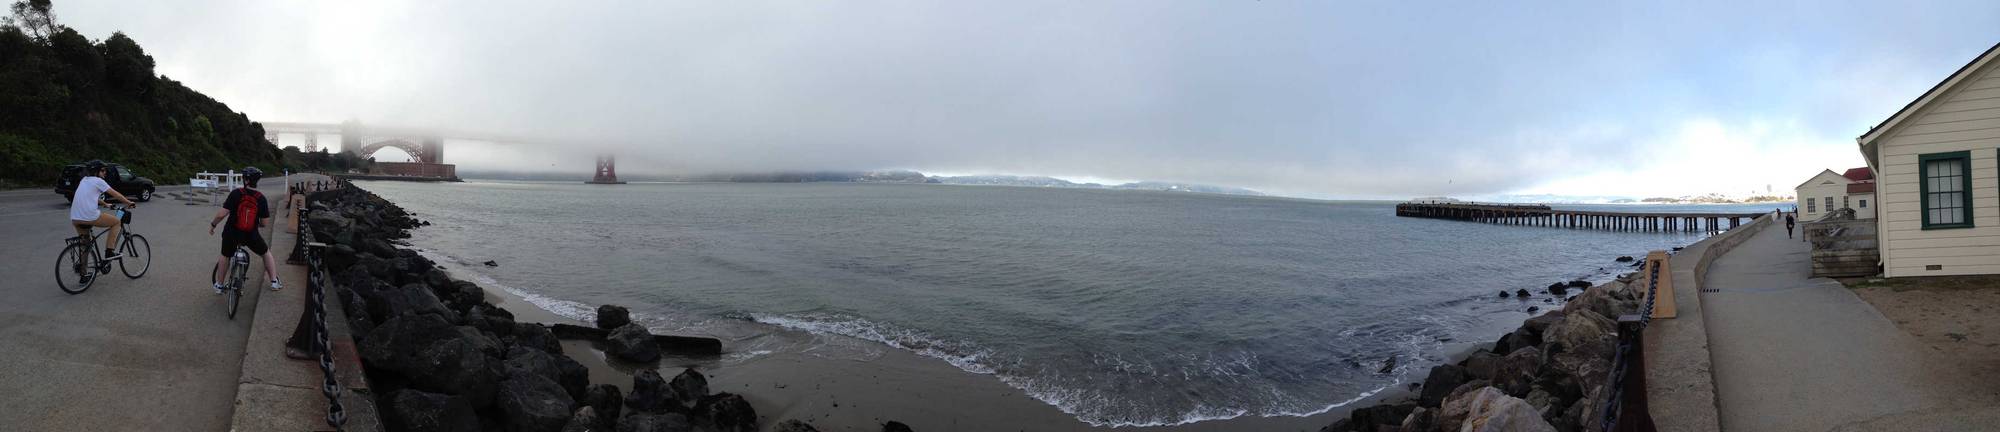 The Golden Gate Bridge just barely visible